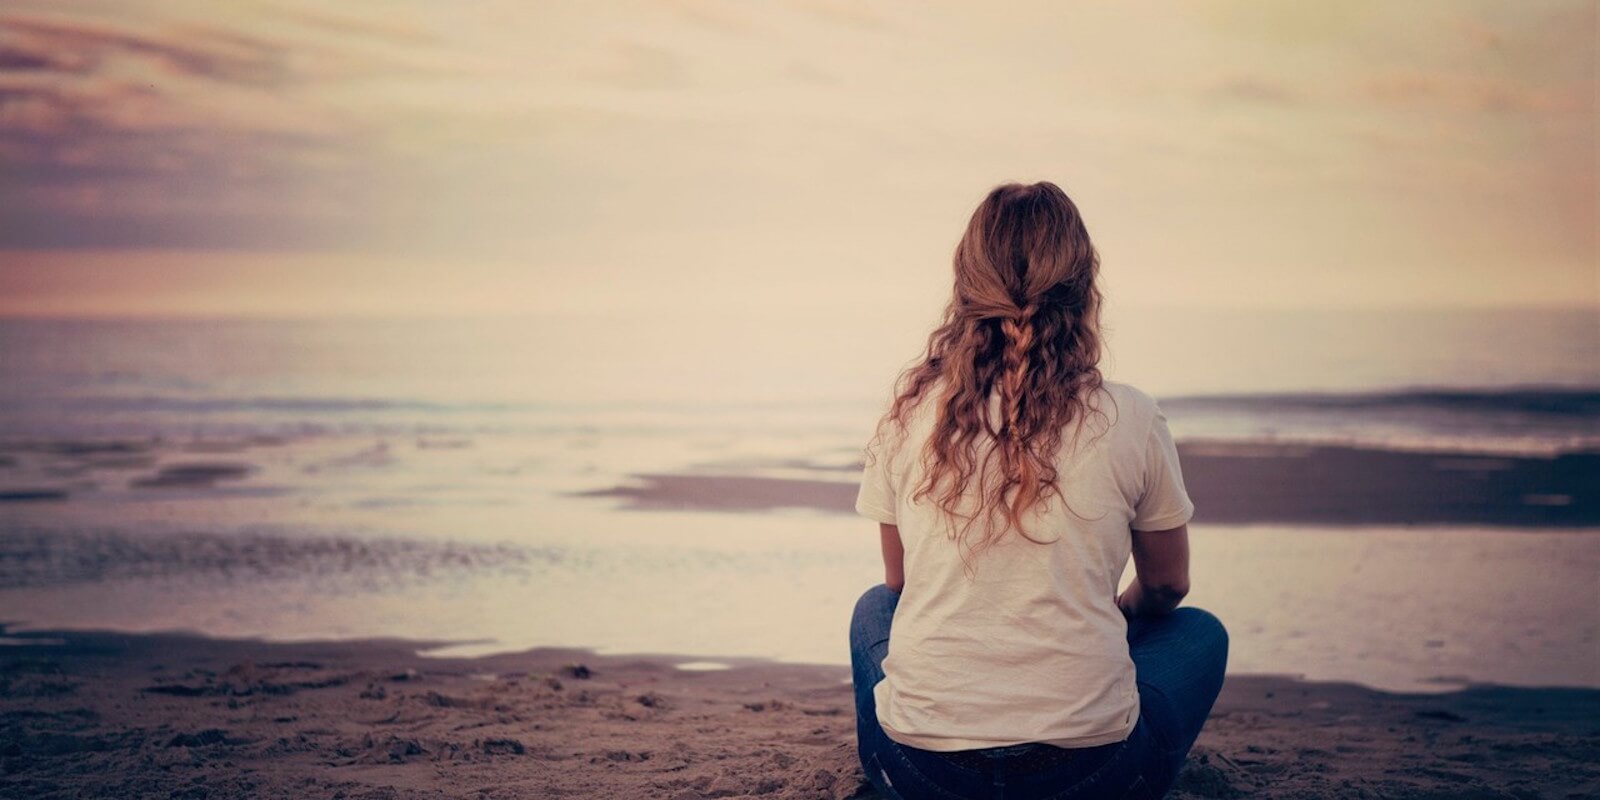 5 Practical Strategies for Applying Mindfulness to Difficult Emotions